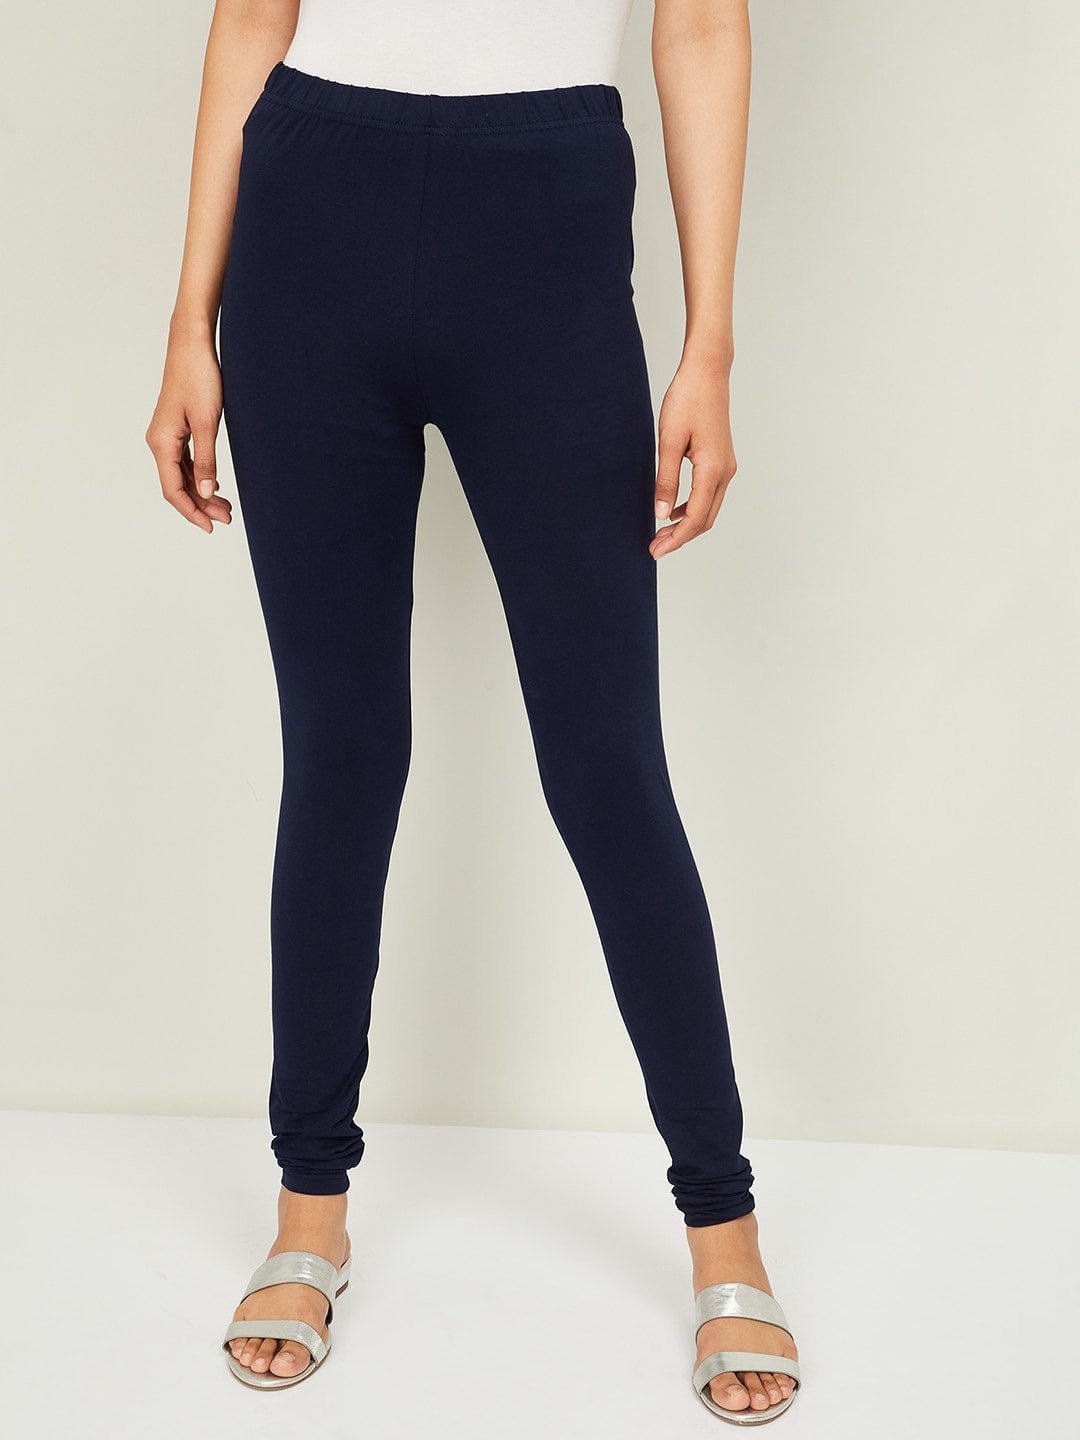 Melange by Lifestyle Women Navy Blue Solid Ankle-Length Leggings Price in India